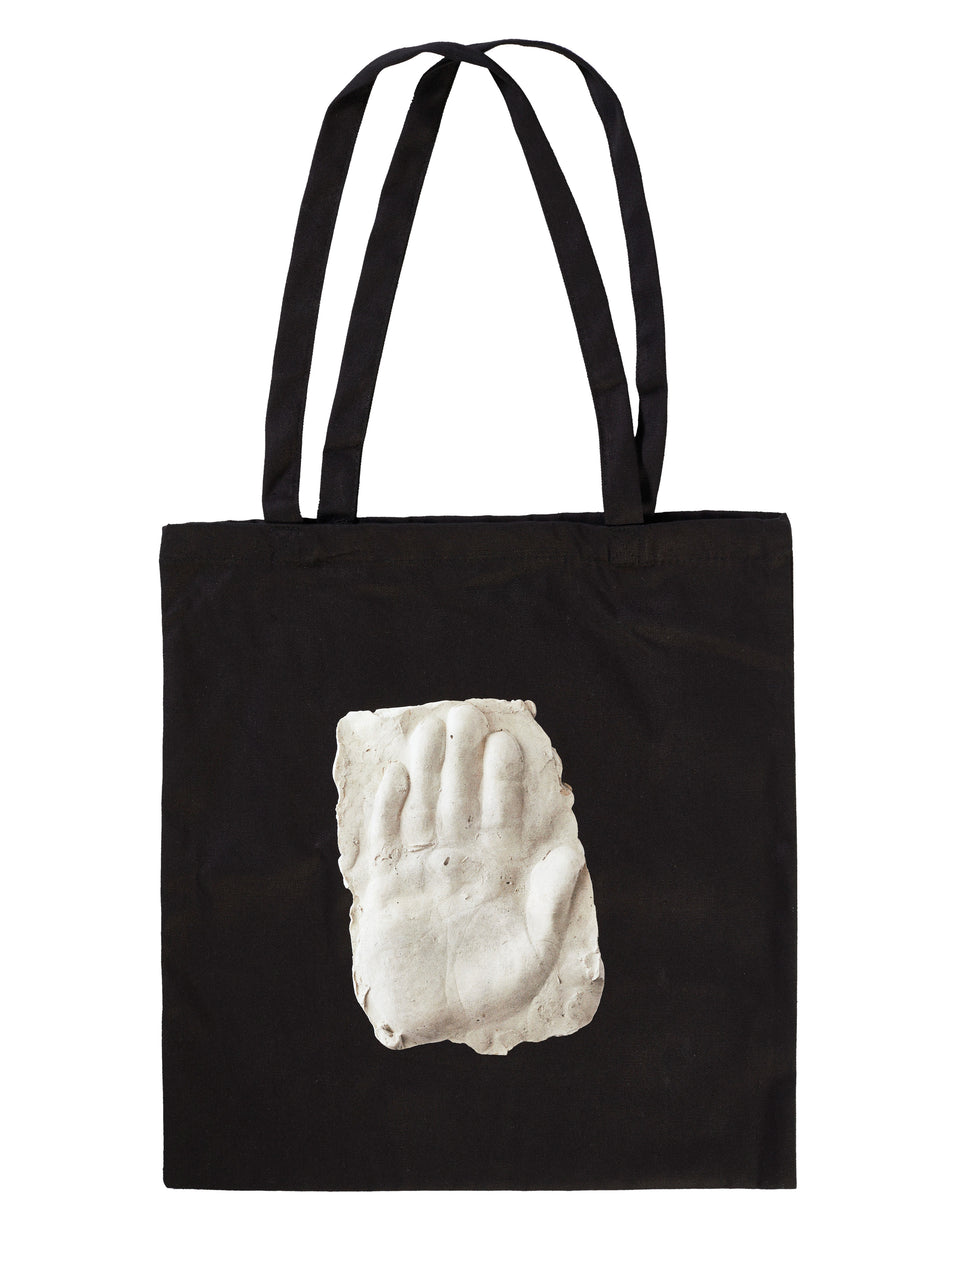 Tote bag. Picasso´s Right Hand 